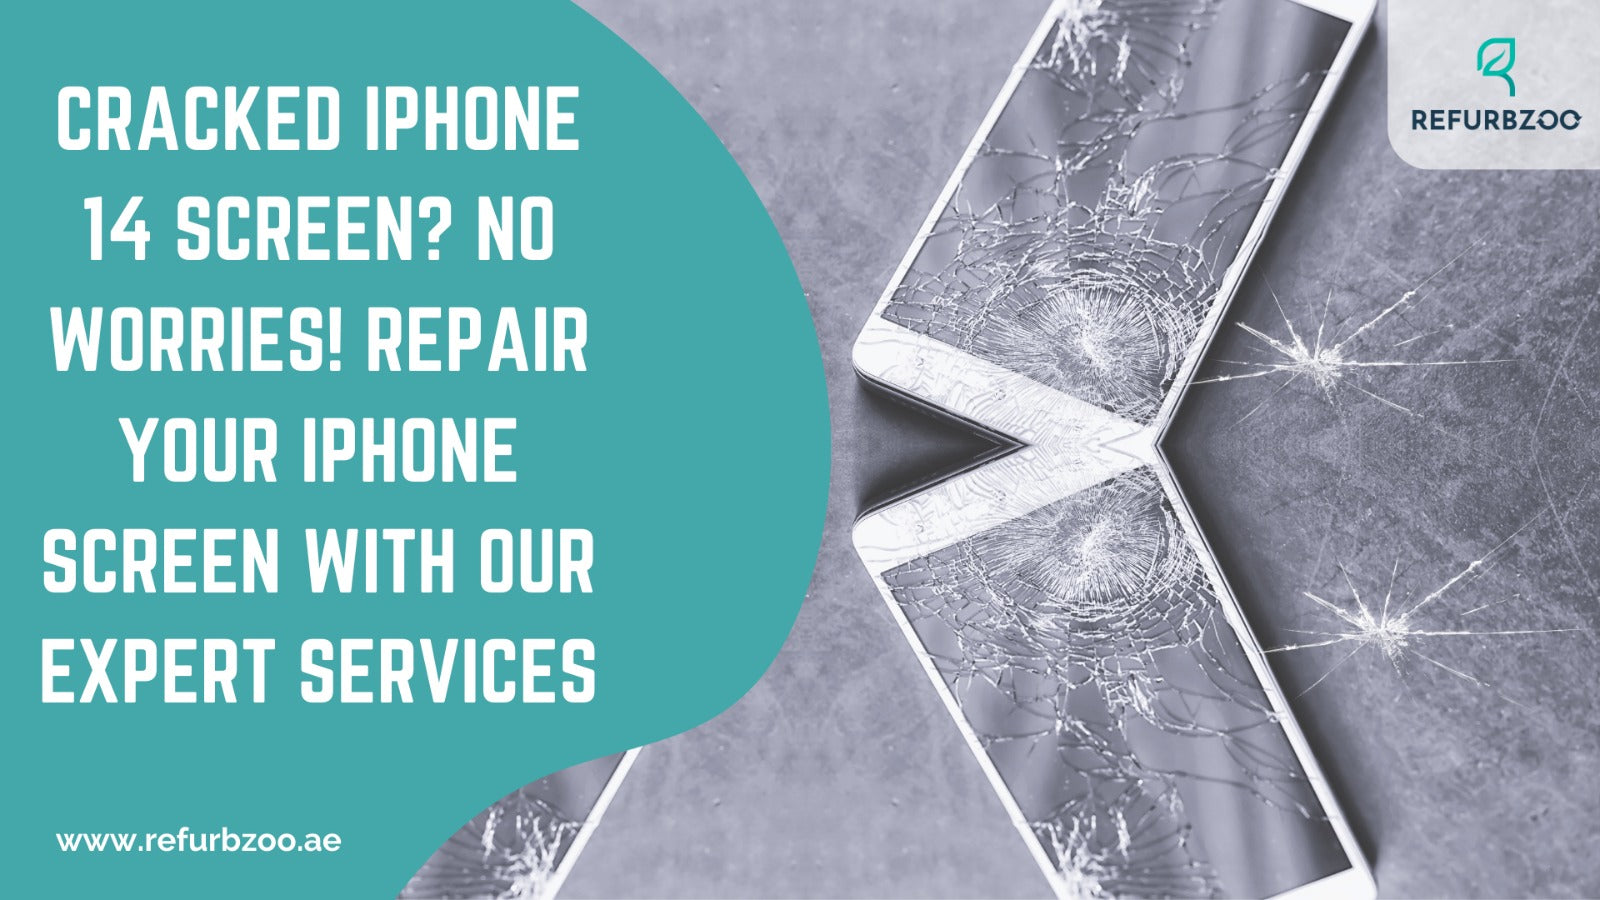 Cracked iPhone 14 screen? No worries! Repair your iPhone screen with our expert services.